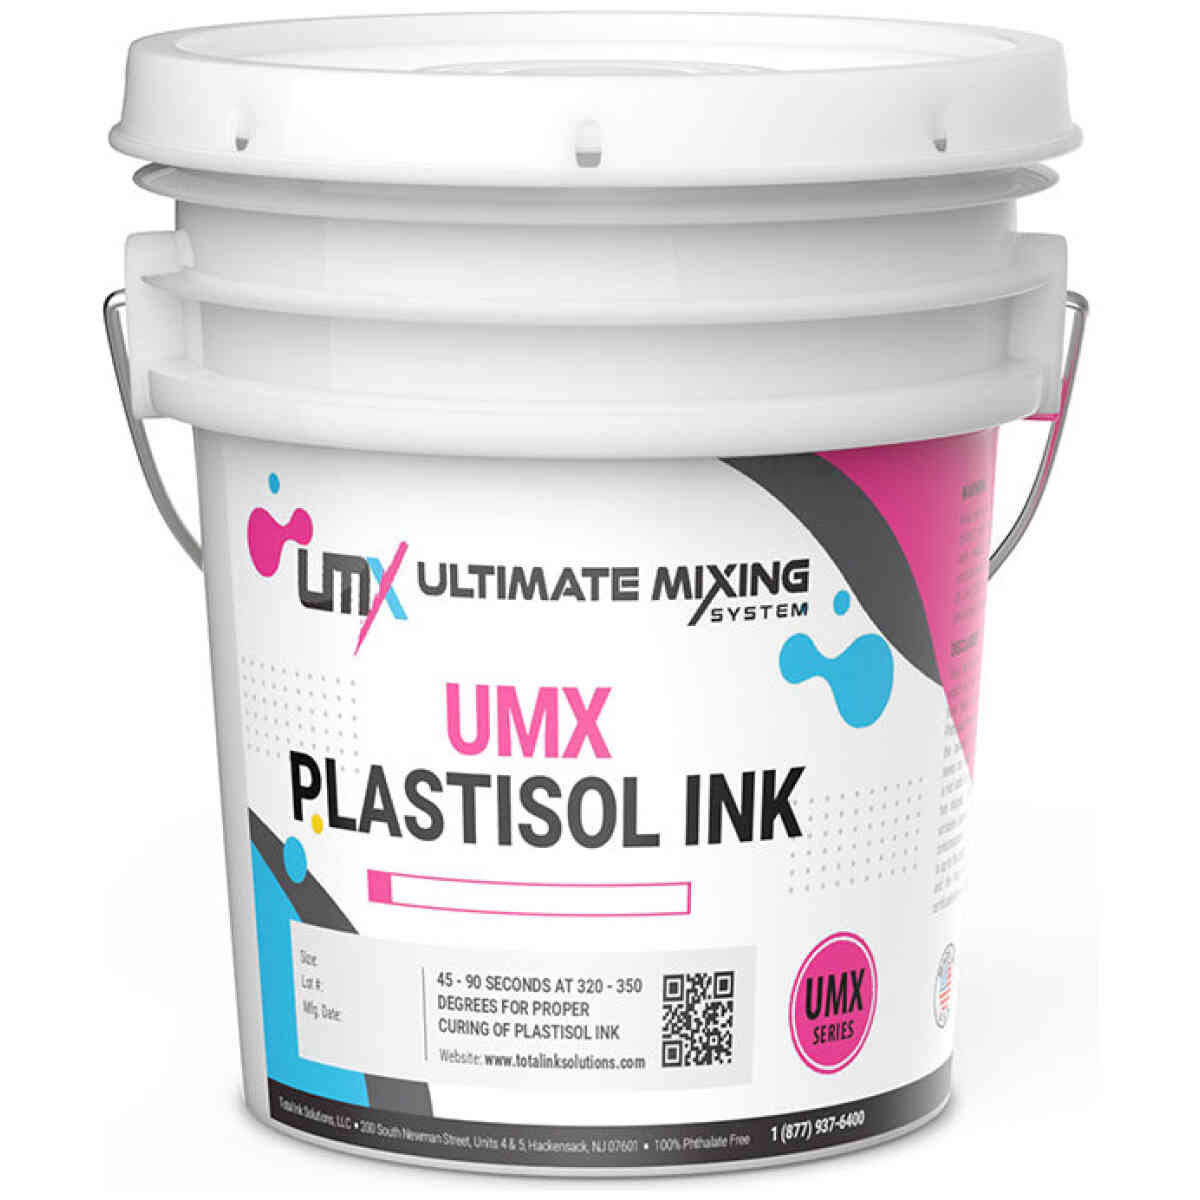 Pantone® Mixing System (Umx) - 5 Gallons TOTAL INK SOLUTIONS®